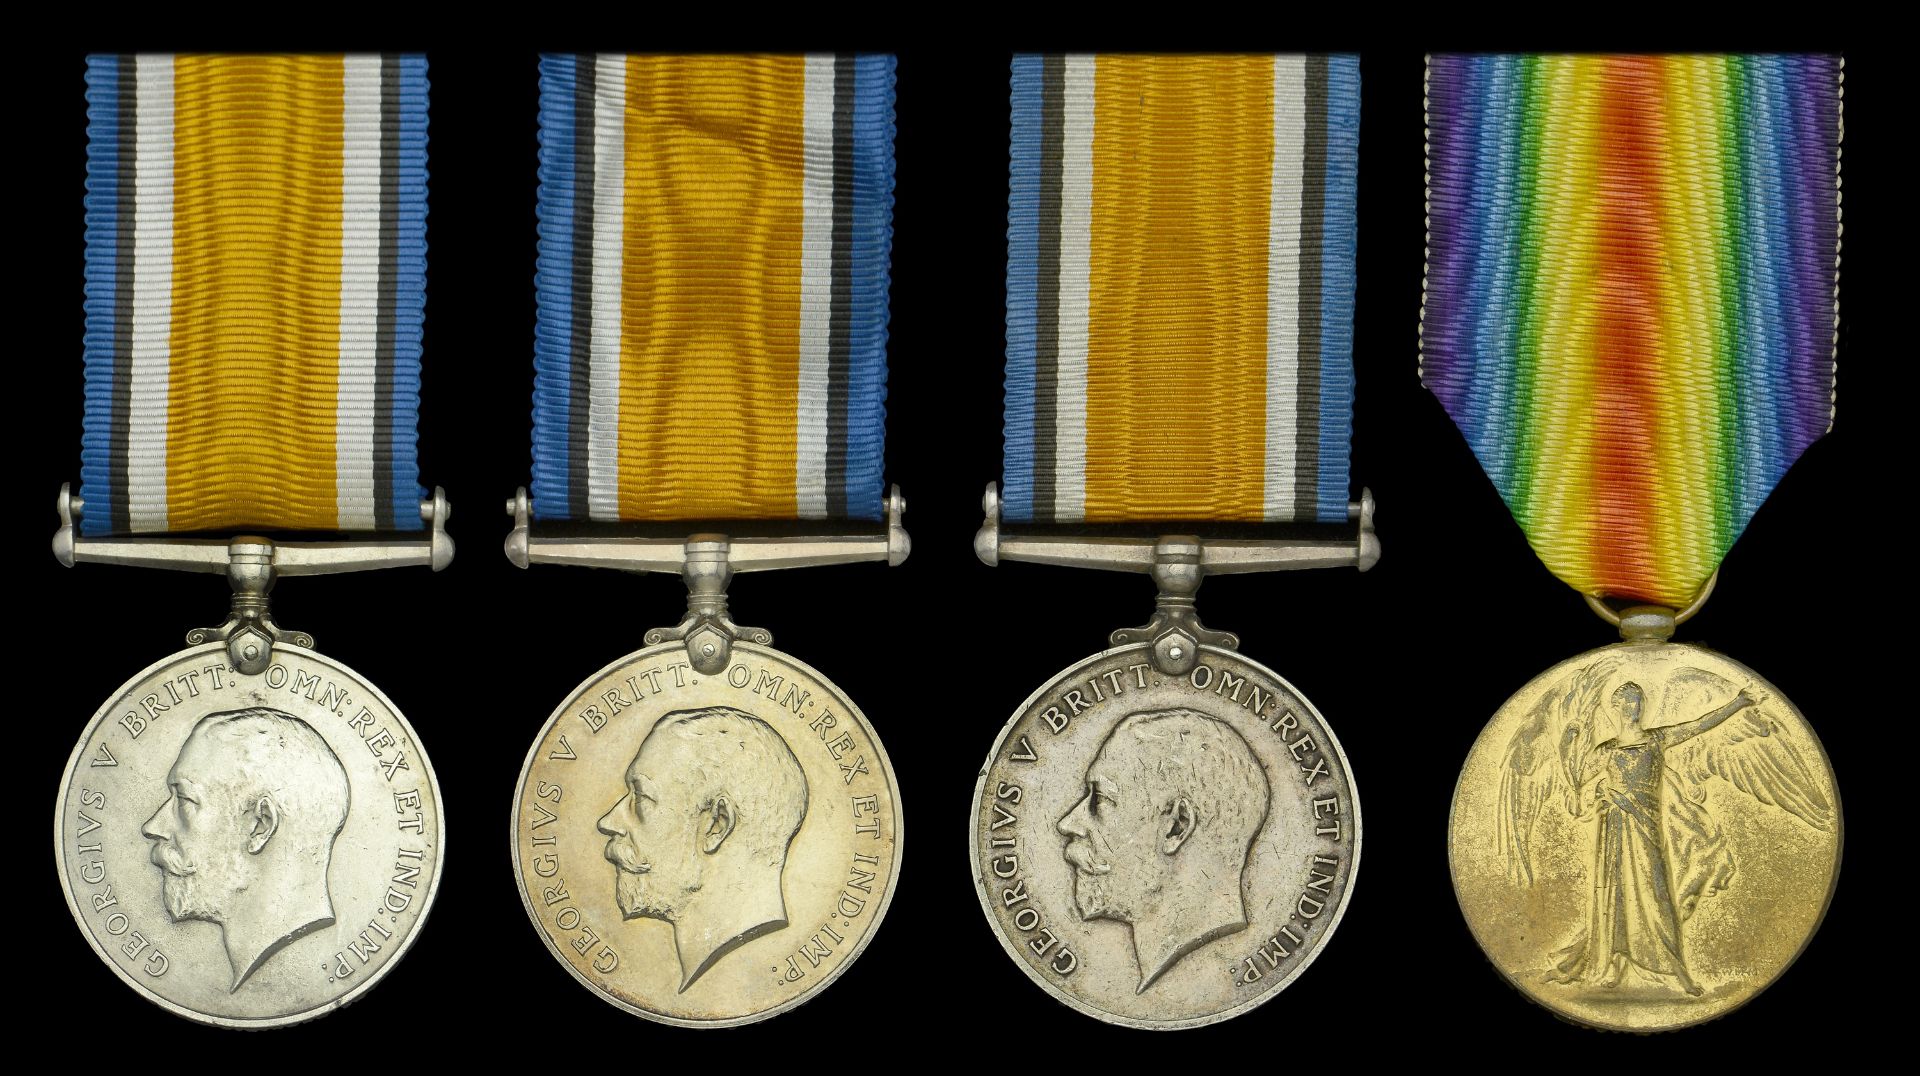 Medals from the Collection of the Soldiers of Oxfordshire Museum, Part 7